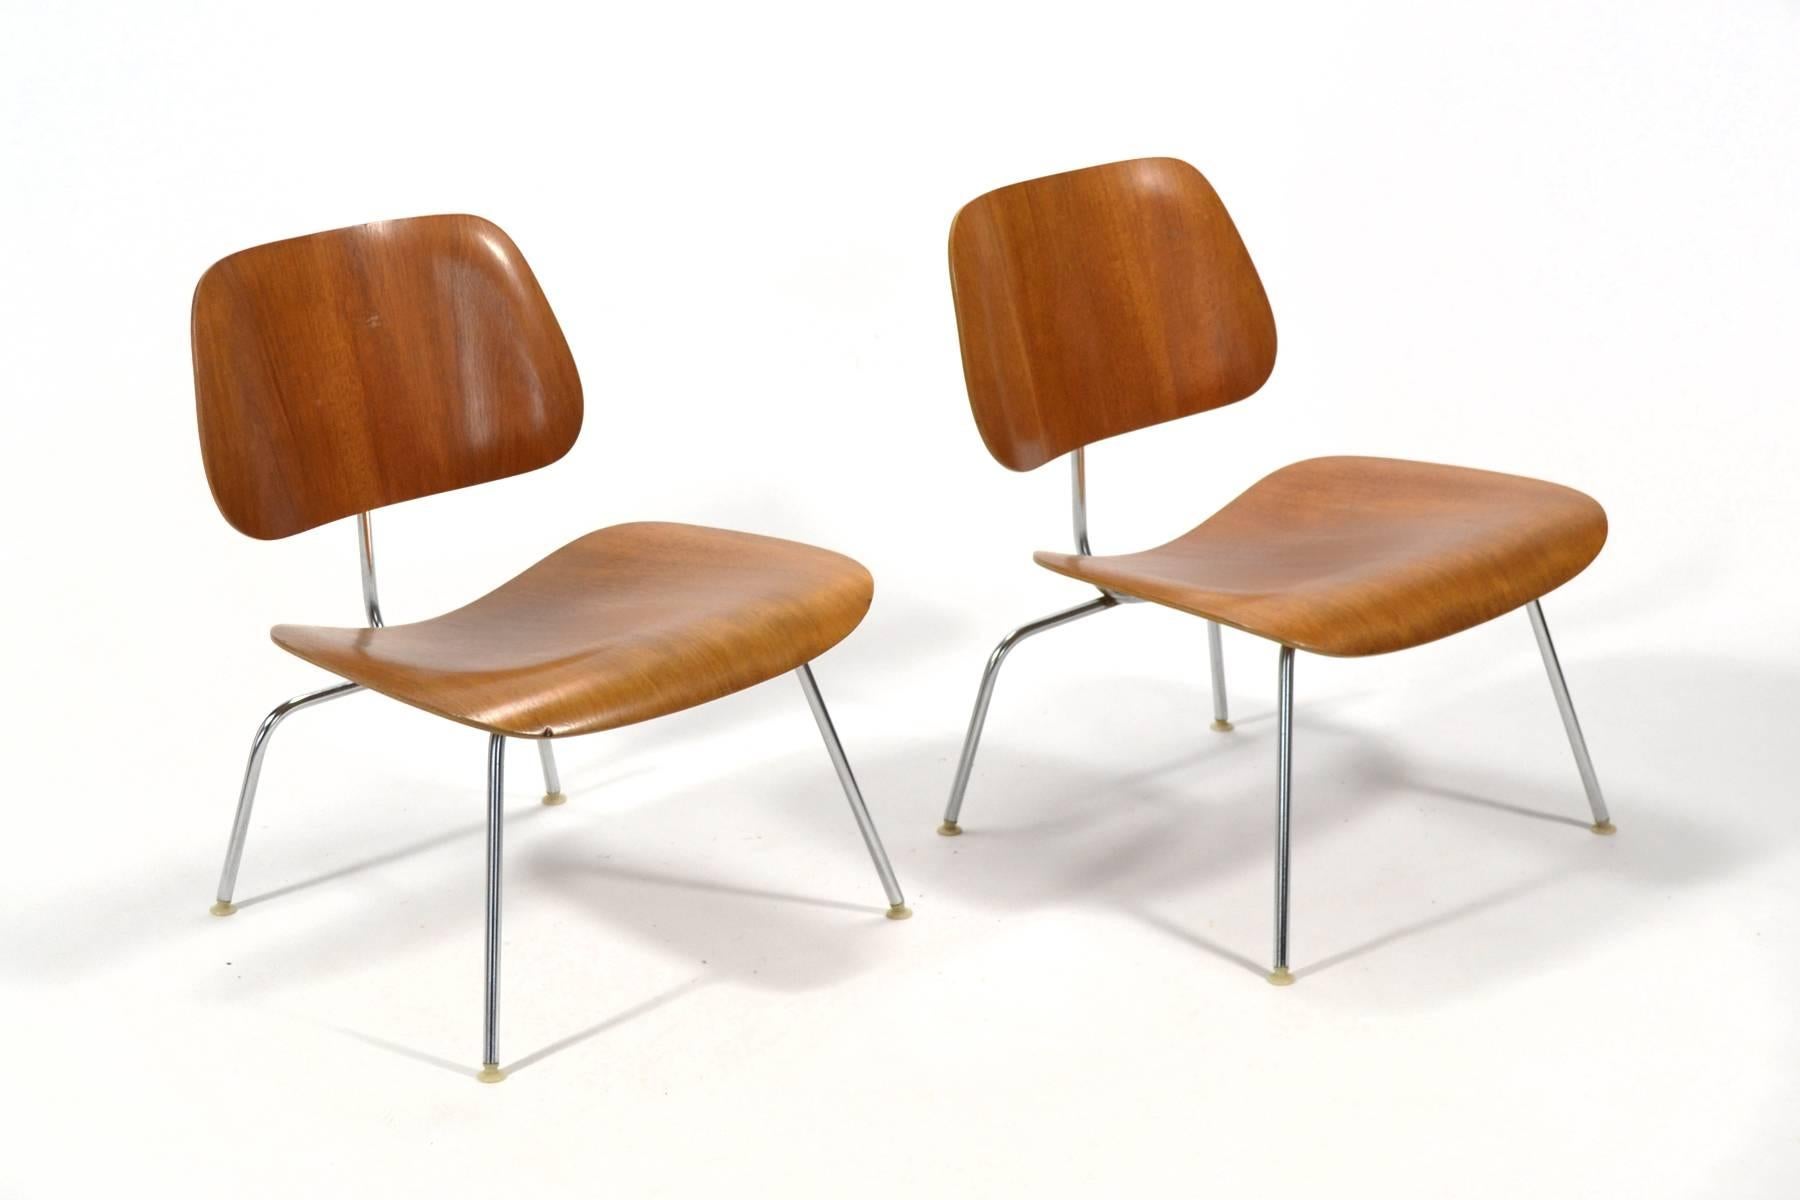 The LCM is our personal favorite of the Eames' plywood chair designs. The metal frame gives an overall visual lightness and makes the wood seat and back appear to float. It combines industrial materials in an original way making this iconic post-war